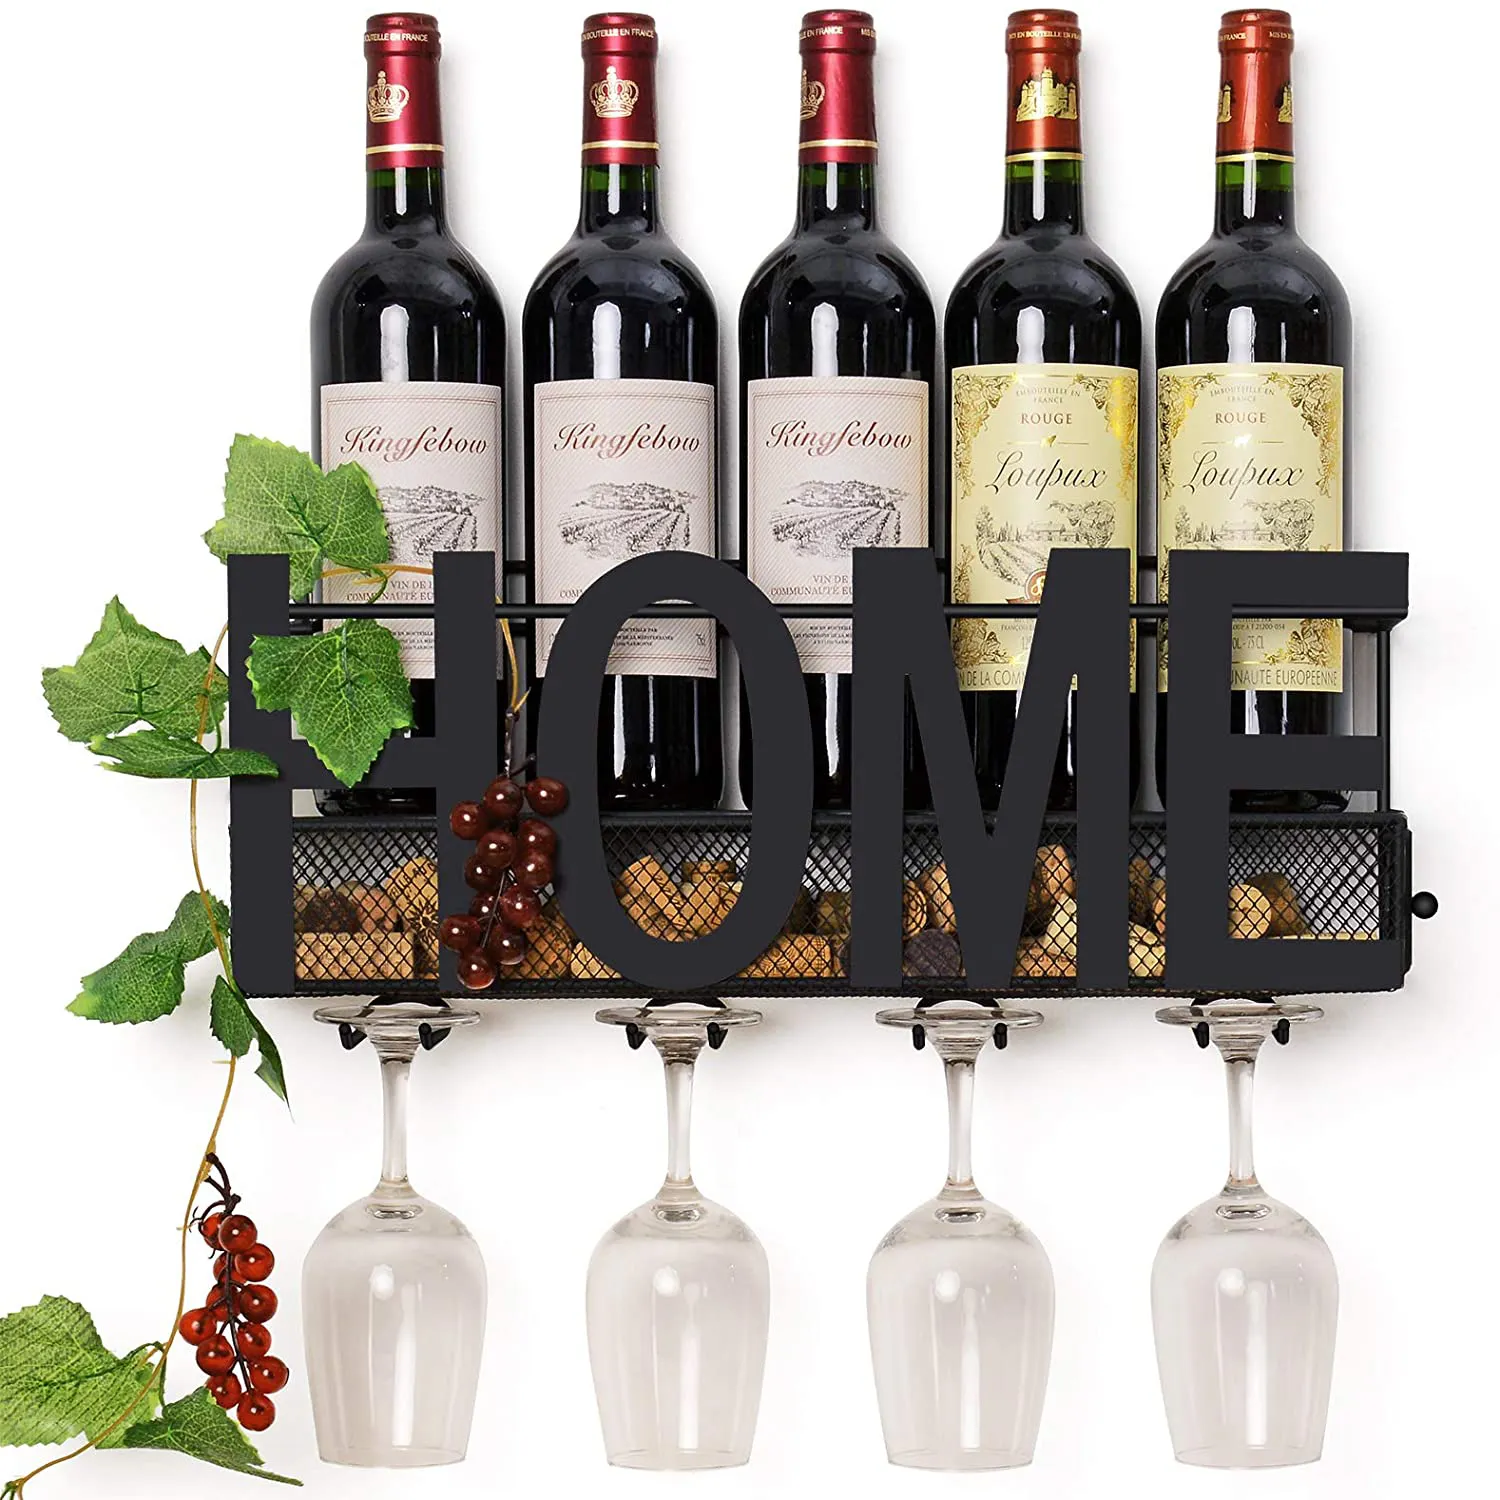 How to Choose a good wine rack?